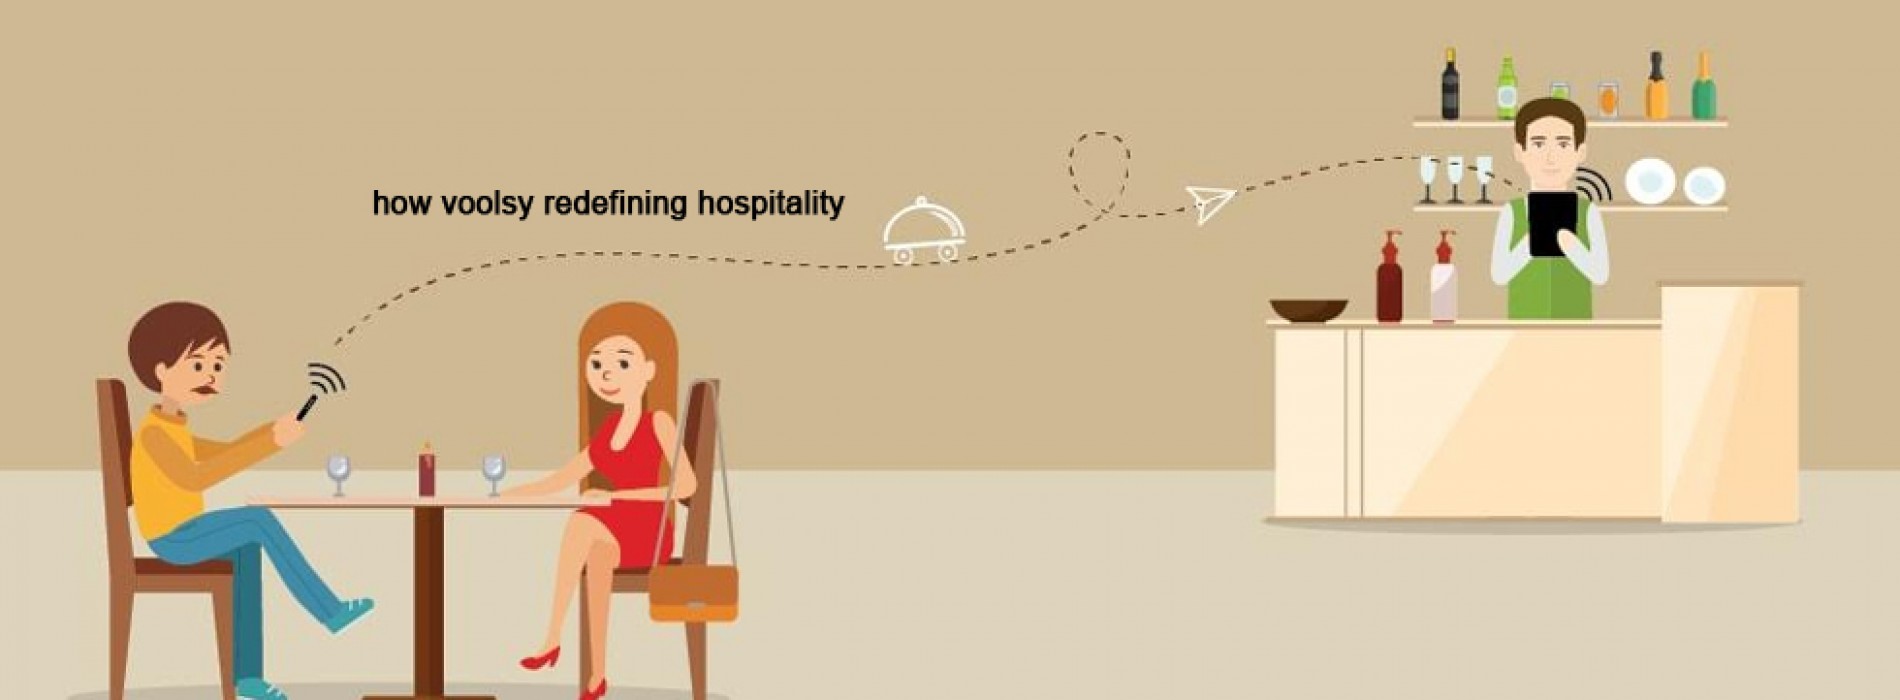 This start-up is elevating the hospitality sector by redefining the way people dine